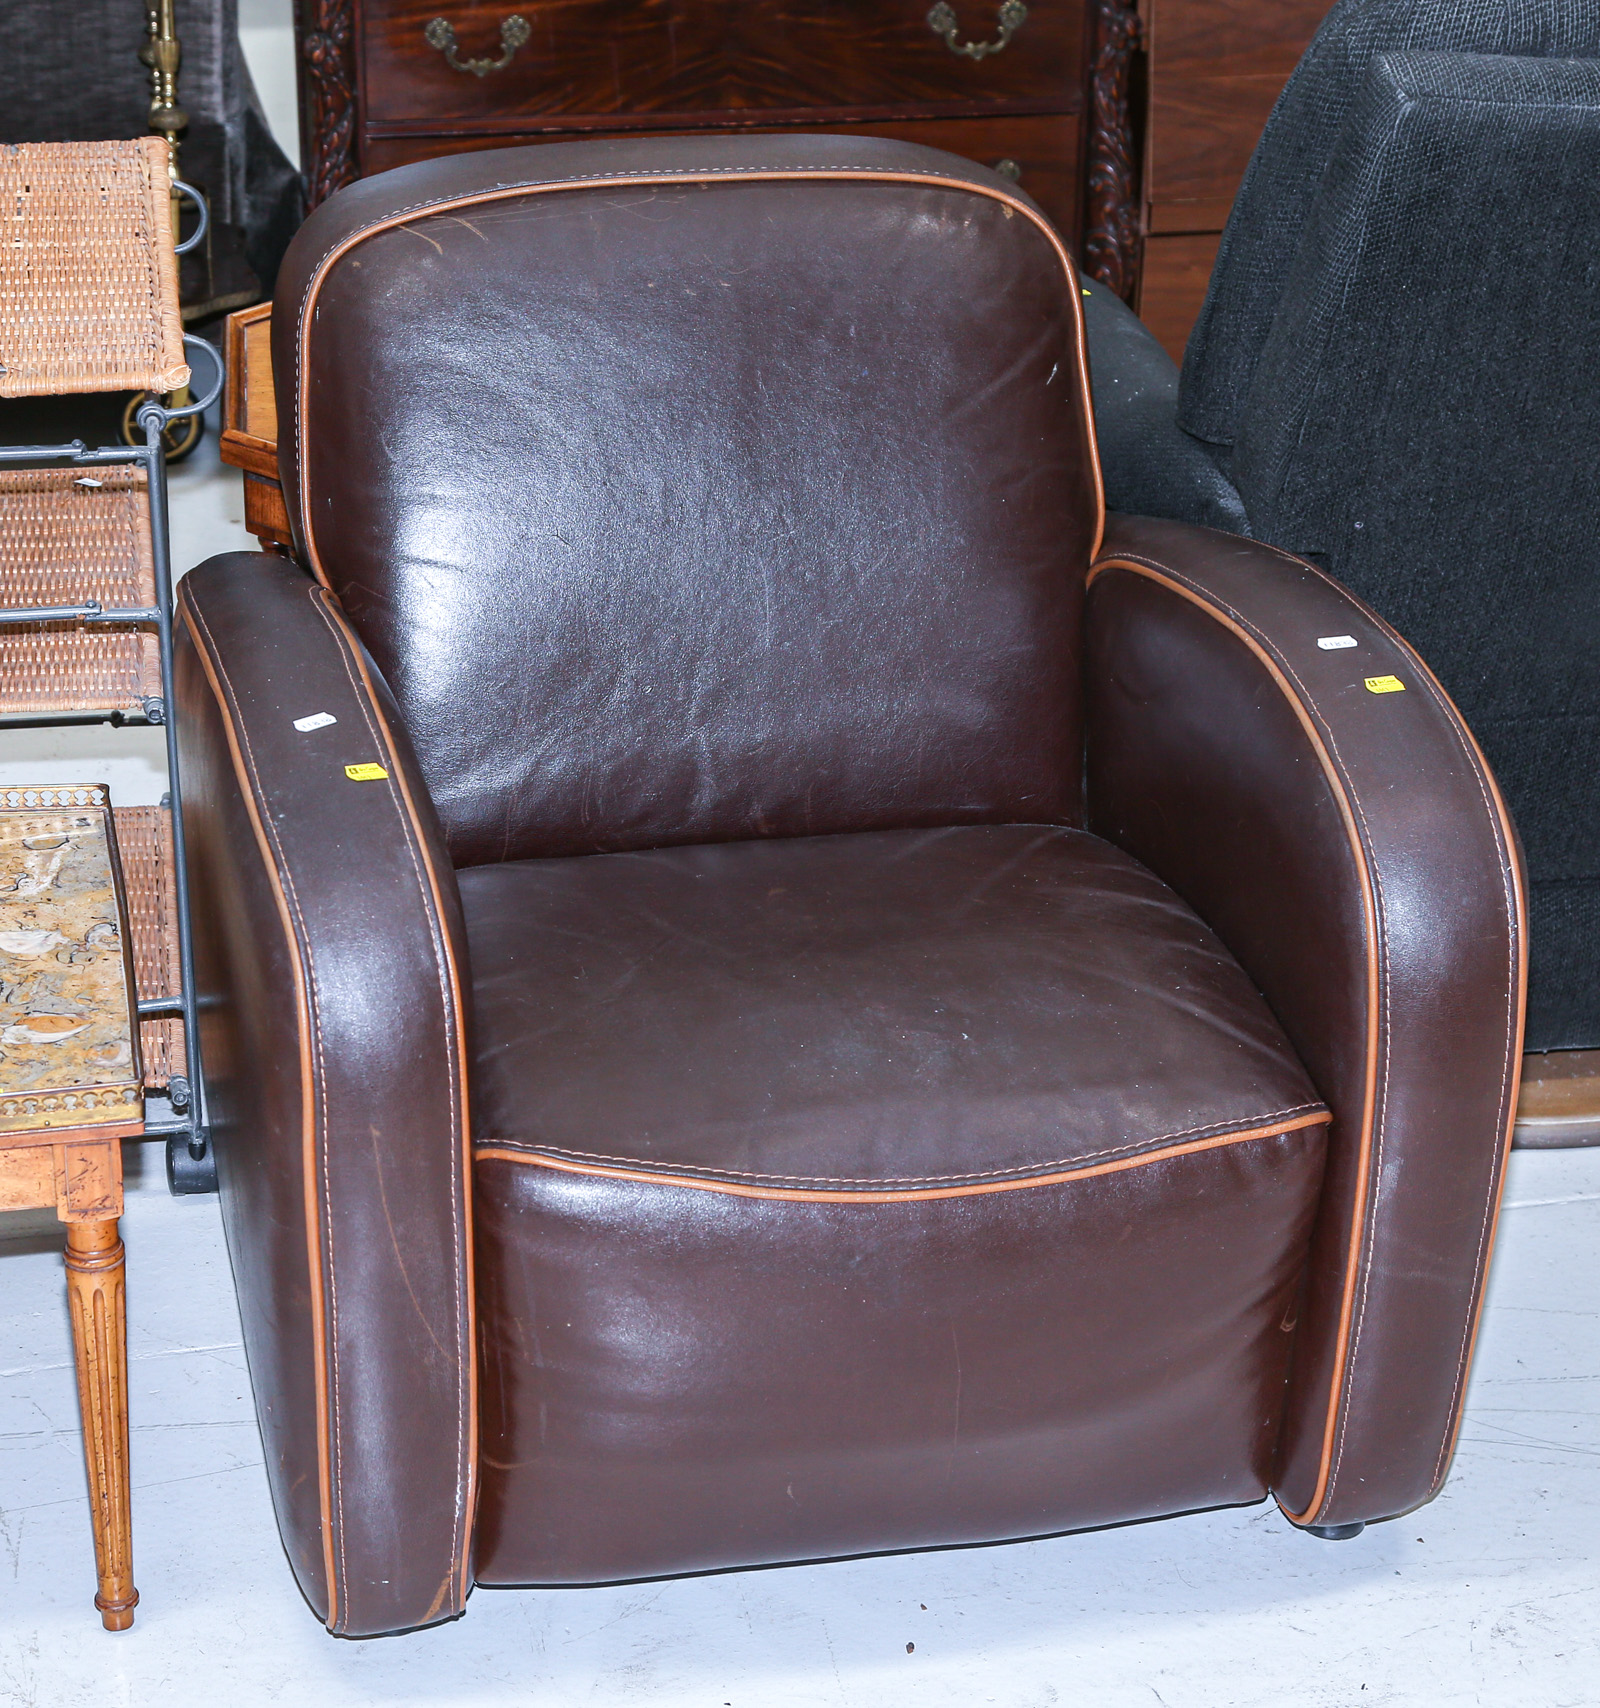 ART DECO STYLE LEATHER-UPHOLSTERED